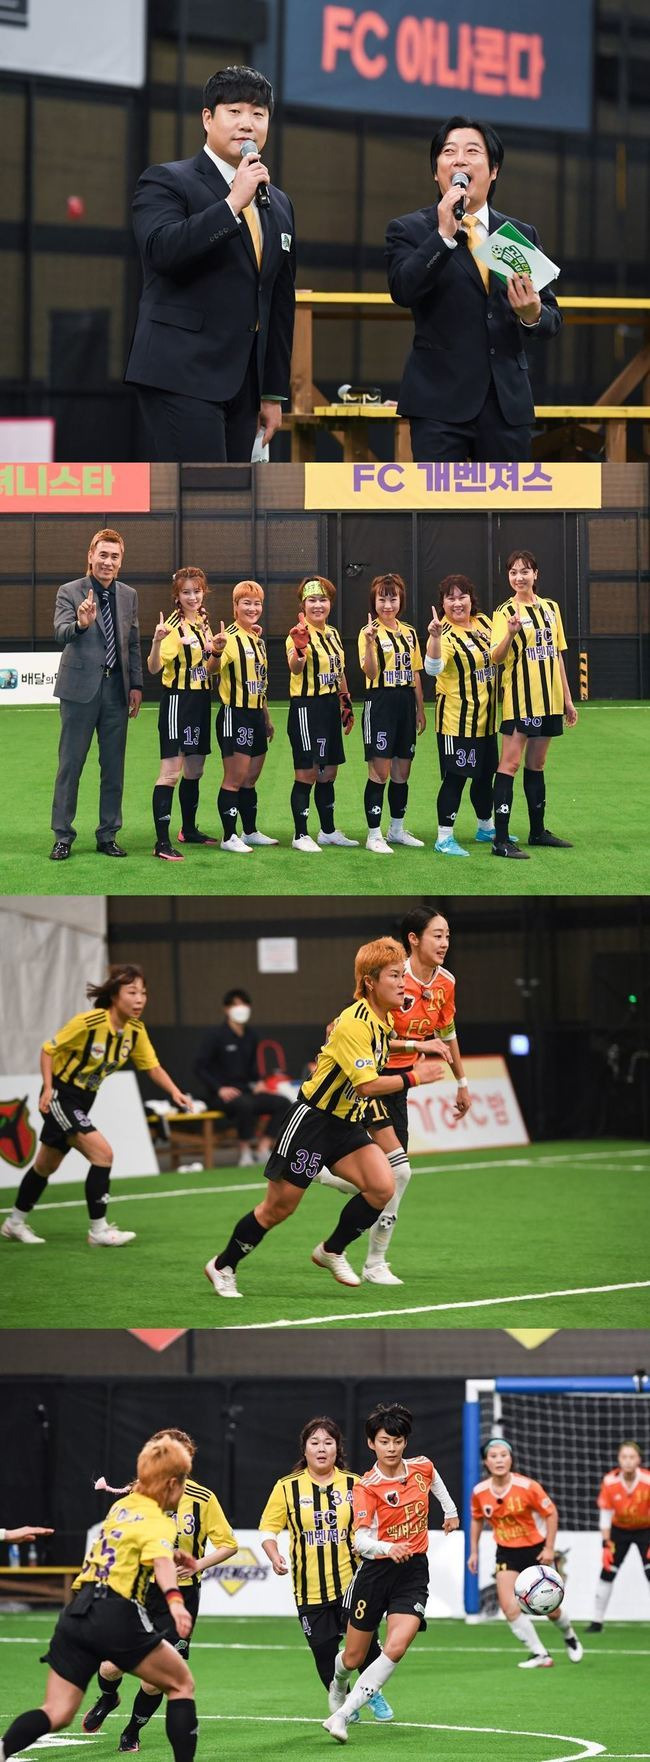 Gavengers transforms into new dark horseSeason 2 League Game, where the start of the game between the new team of SBS Goal Strikes and the existing team begins on December 8th, finally begins.At the opening ceremony, the season 2 stadium Golchun Womens Stadium will be unveiled.In addition, a total of six teams, including FC Goocheok Jangsin, FC Gavengers, and FC Acgenista, who have completed the reorganization for Season 2, and FC Top Girl, FC Wonder Woman, and FC Anaconda, who have made their debuts harshly, will gather together to open the opening of the season 2 soccer war.The first game to announce the start of the soccer war of the more powerful sisters will be the Kyonggi between FC Gavengers and FC Axionista.Last season, FC Gavengers was saddened by the injury of Ace Onami and others, but after that, they succeeded in recruiting talented members through a large-scale audition.NEW member Kim Hye-seons speed, young blood Kim Seung-hyes unique ball control ability, and the new gavengers, which added the physicals of the tall Lee Eun-hyung, raise questions about whether they will become the Goals Dark Horse.Attention is focusing on whether FC Gavengers, who stayed in the bottom of last season, will be a candidate for the championship.